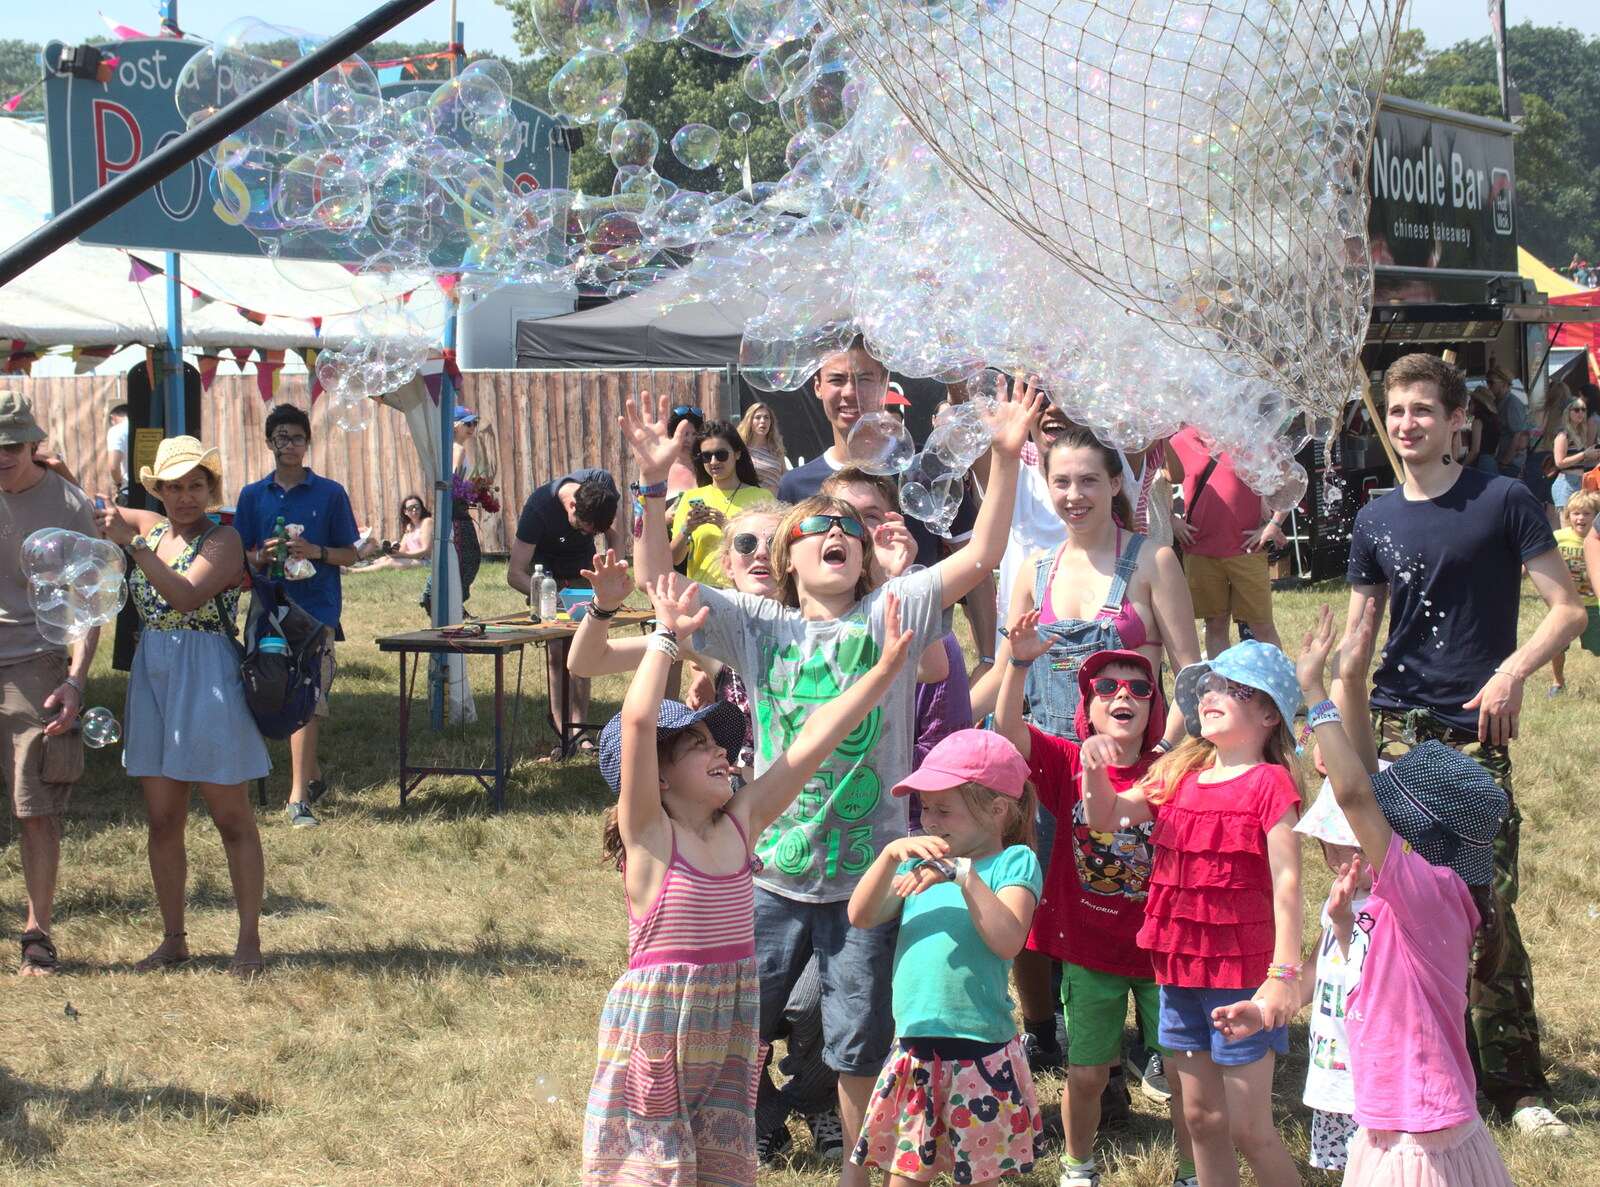 Elsewhere, there are yet more bubbles from Latitude Festival, Henham Park, Southwold, Suffolk - 17th July 2014